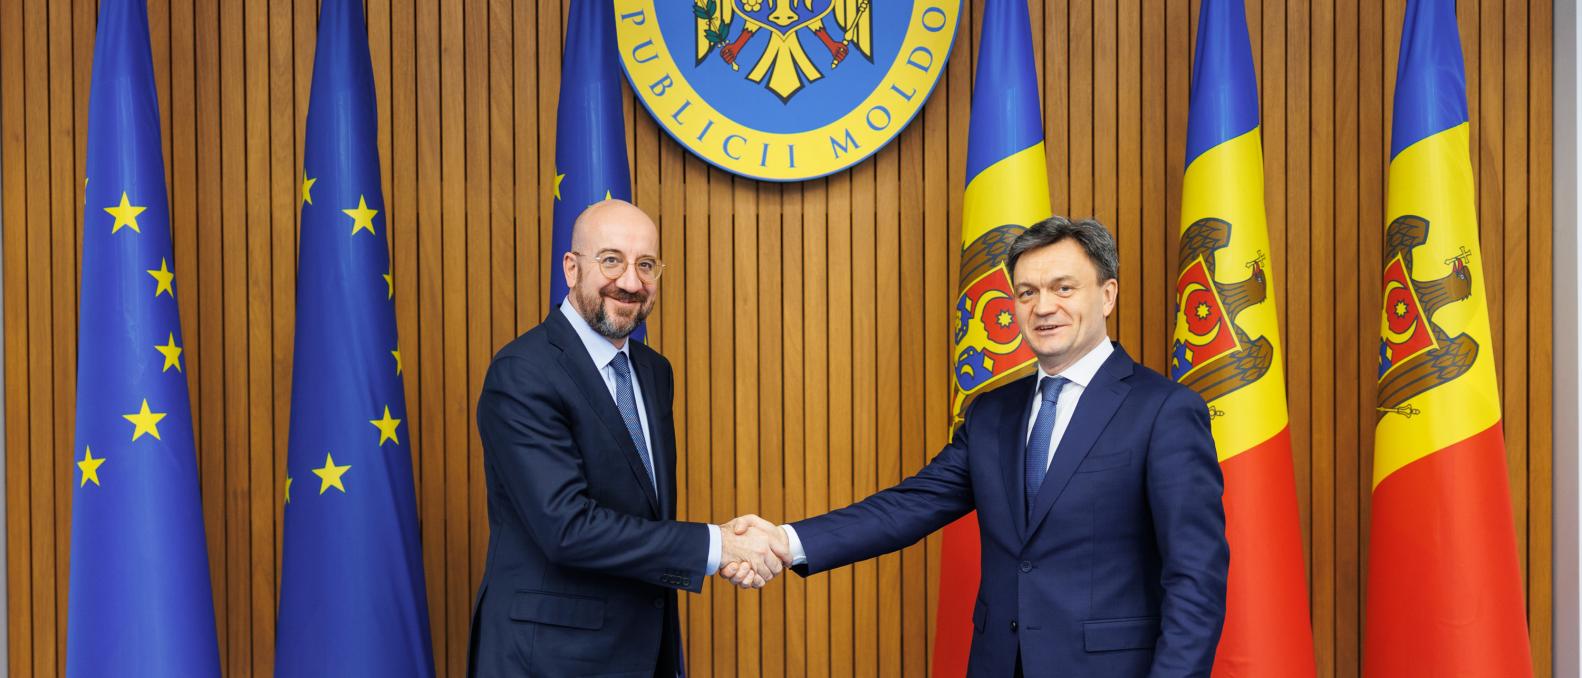 President of the European Council and Prime Minister of Moldova